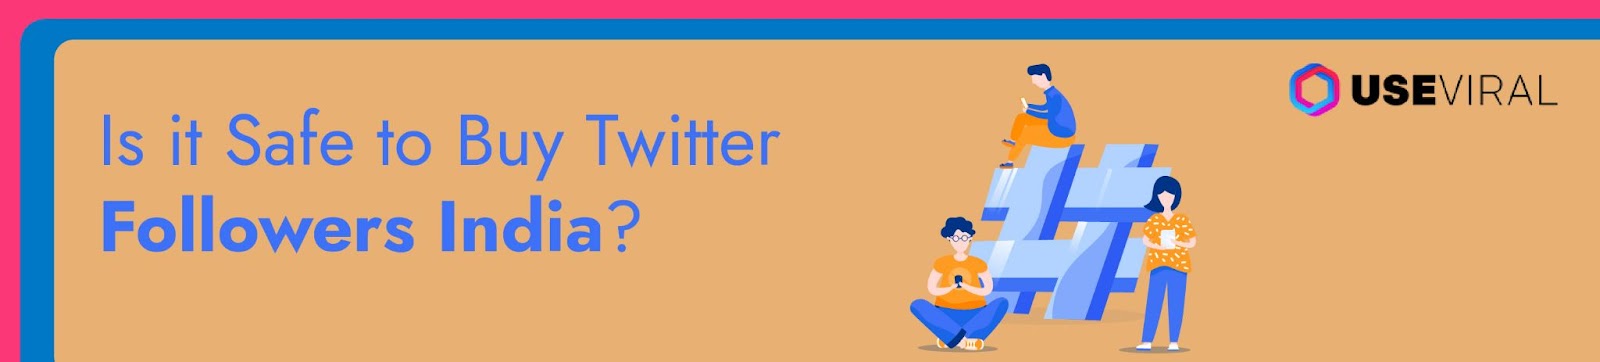 Is it Safe to Buy Twitter Followers India?